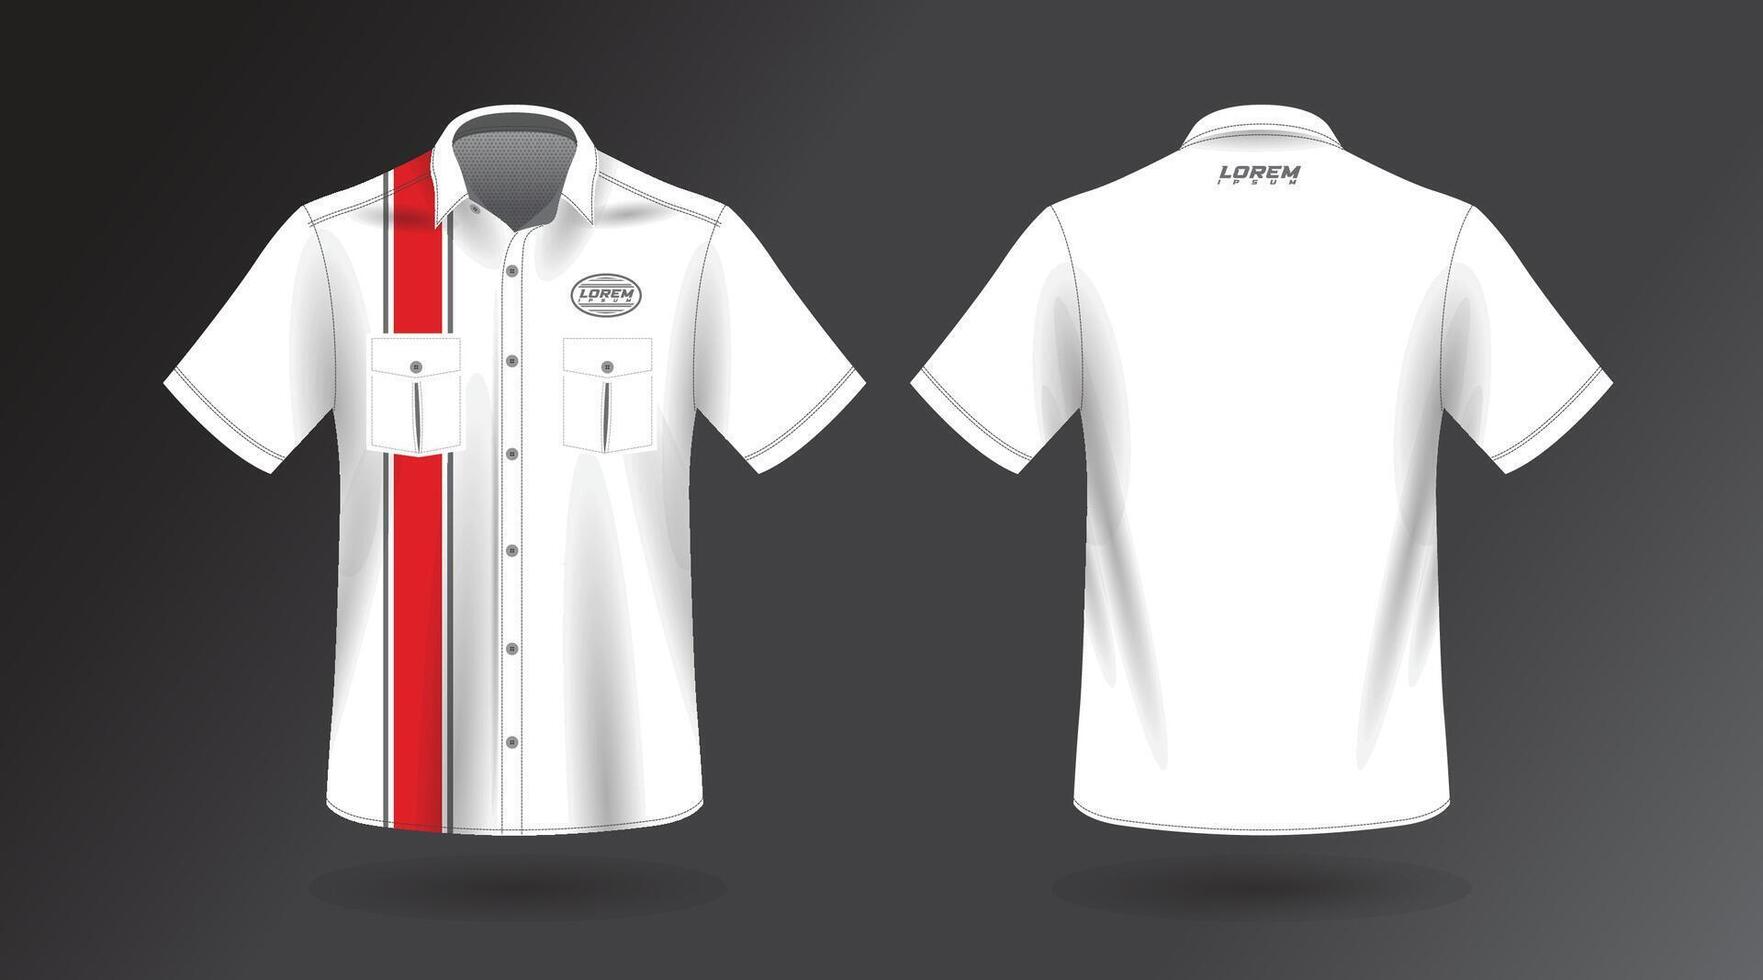 modern short sleeve shirt design for work . front and back view, Vector File